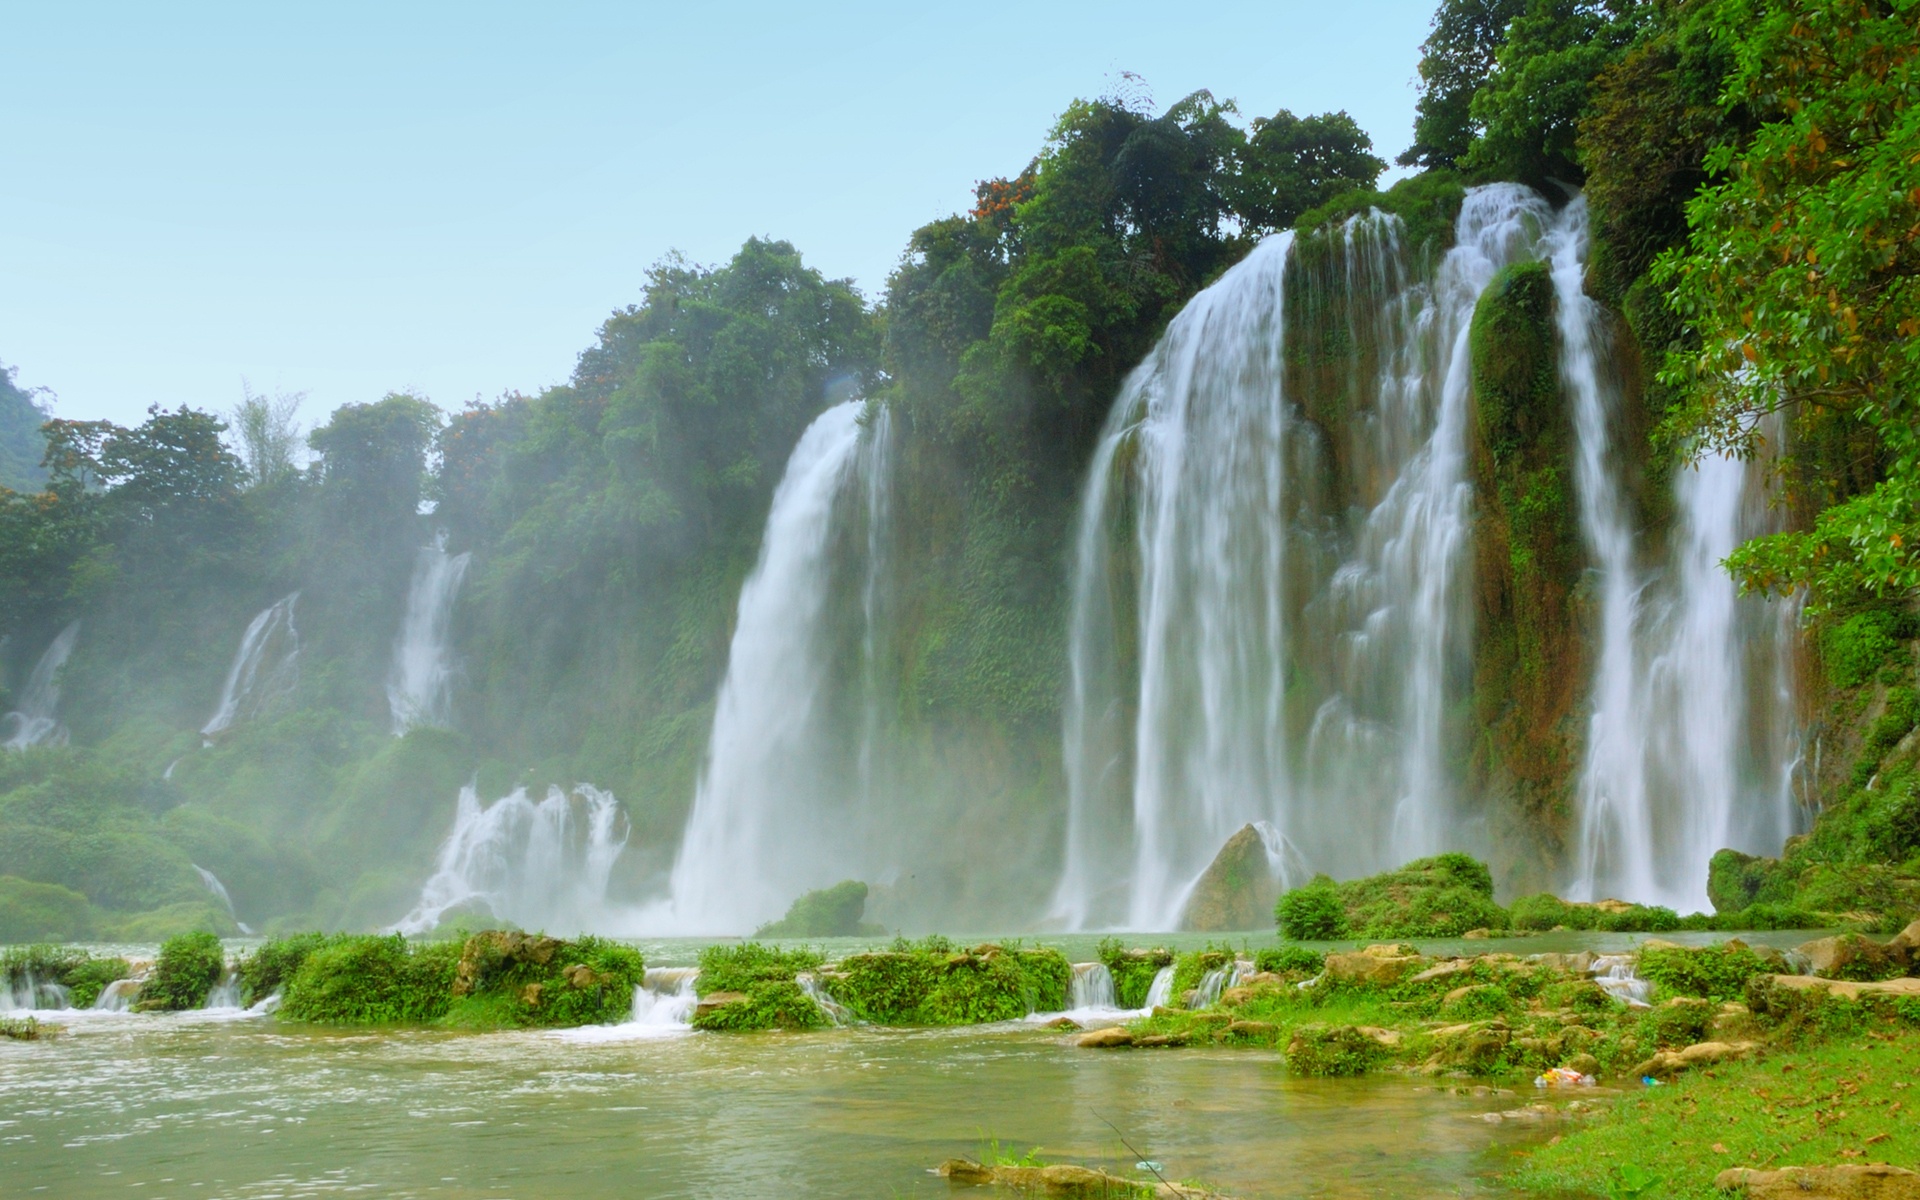 Ban Gioc-Detian Falls in Vietnam, showcasing stunning nature with lush vegetation and flowing water.